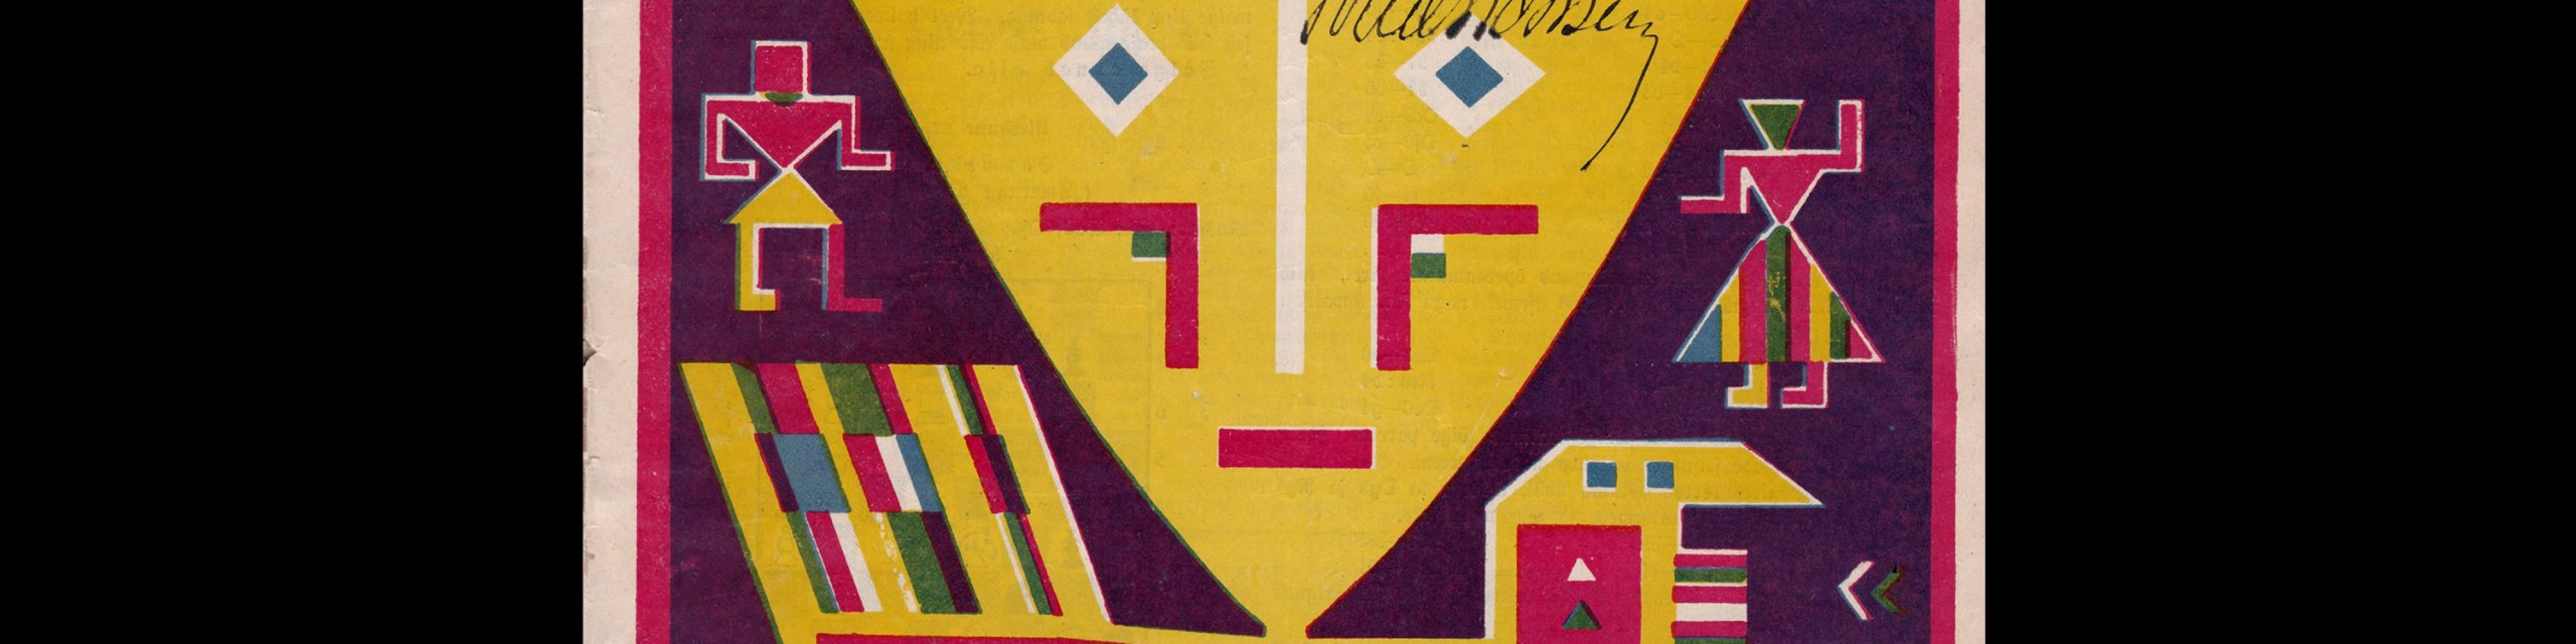 Ronk, Nr, 21, 1926. Cover design by Peet Aren